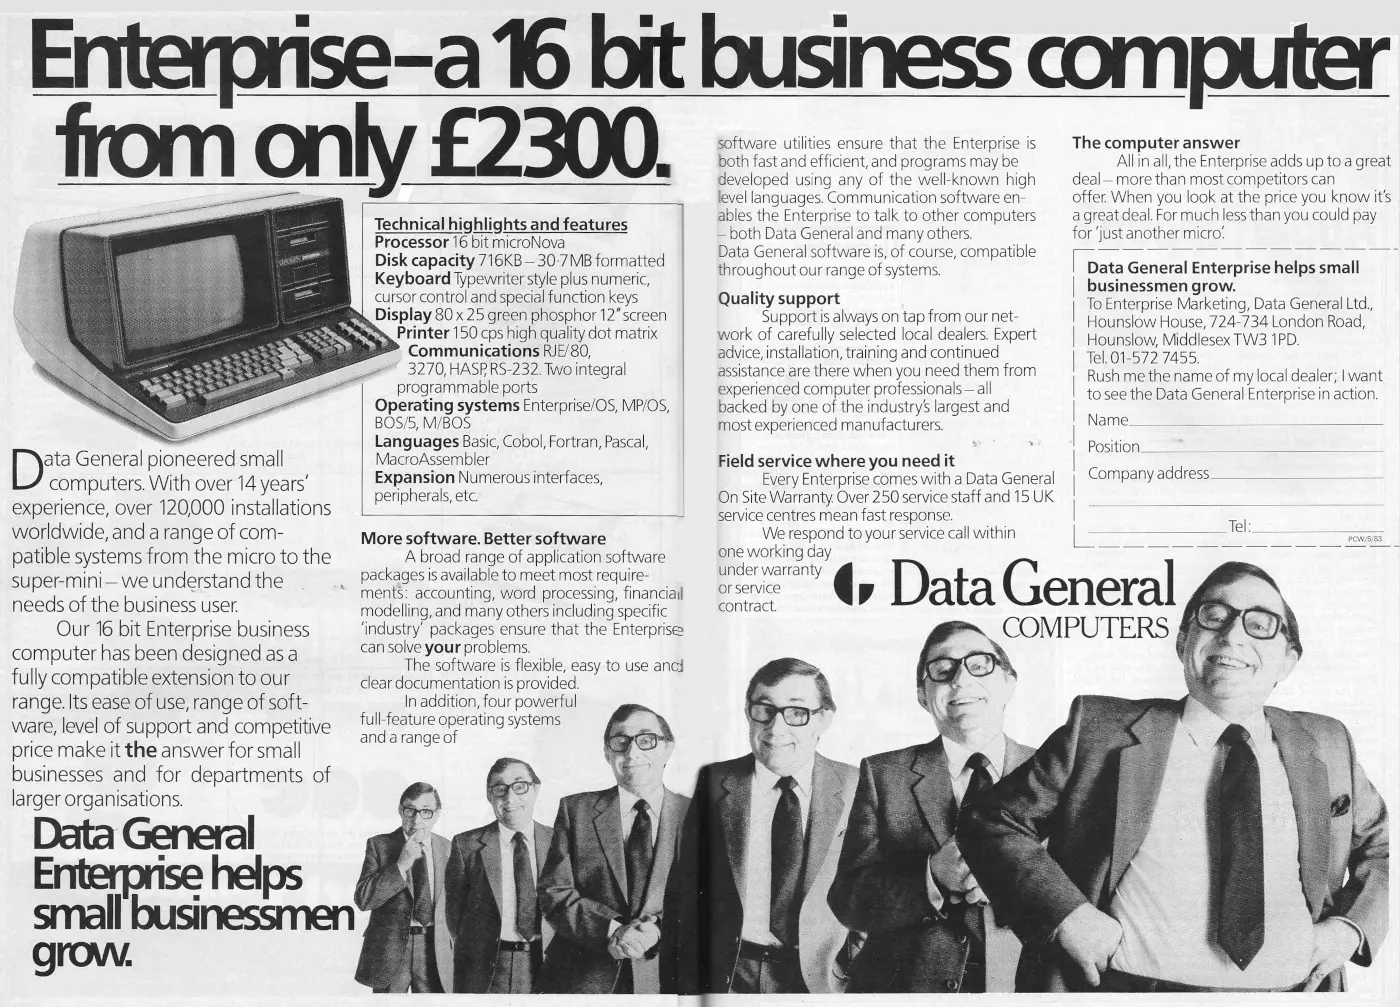 Data General Advert: Enterprise - a 16 bit business computer from only £2,300, from Personal Computer World, October 1983